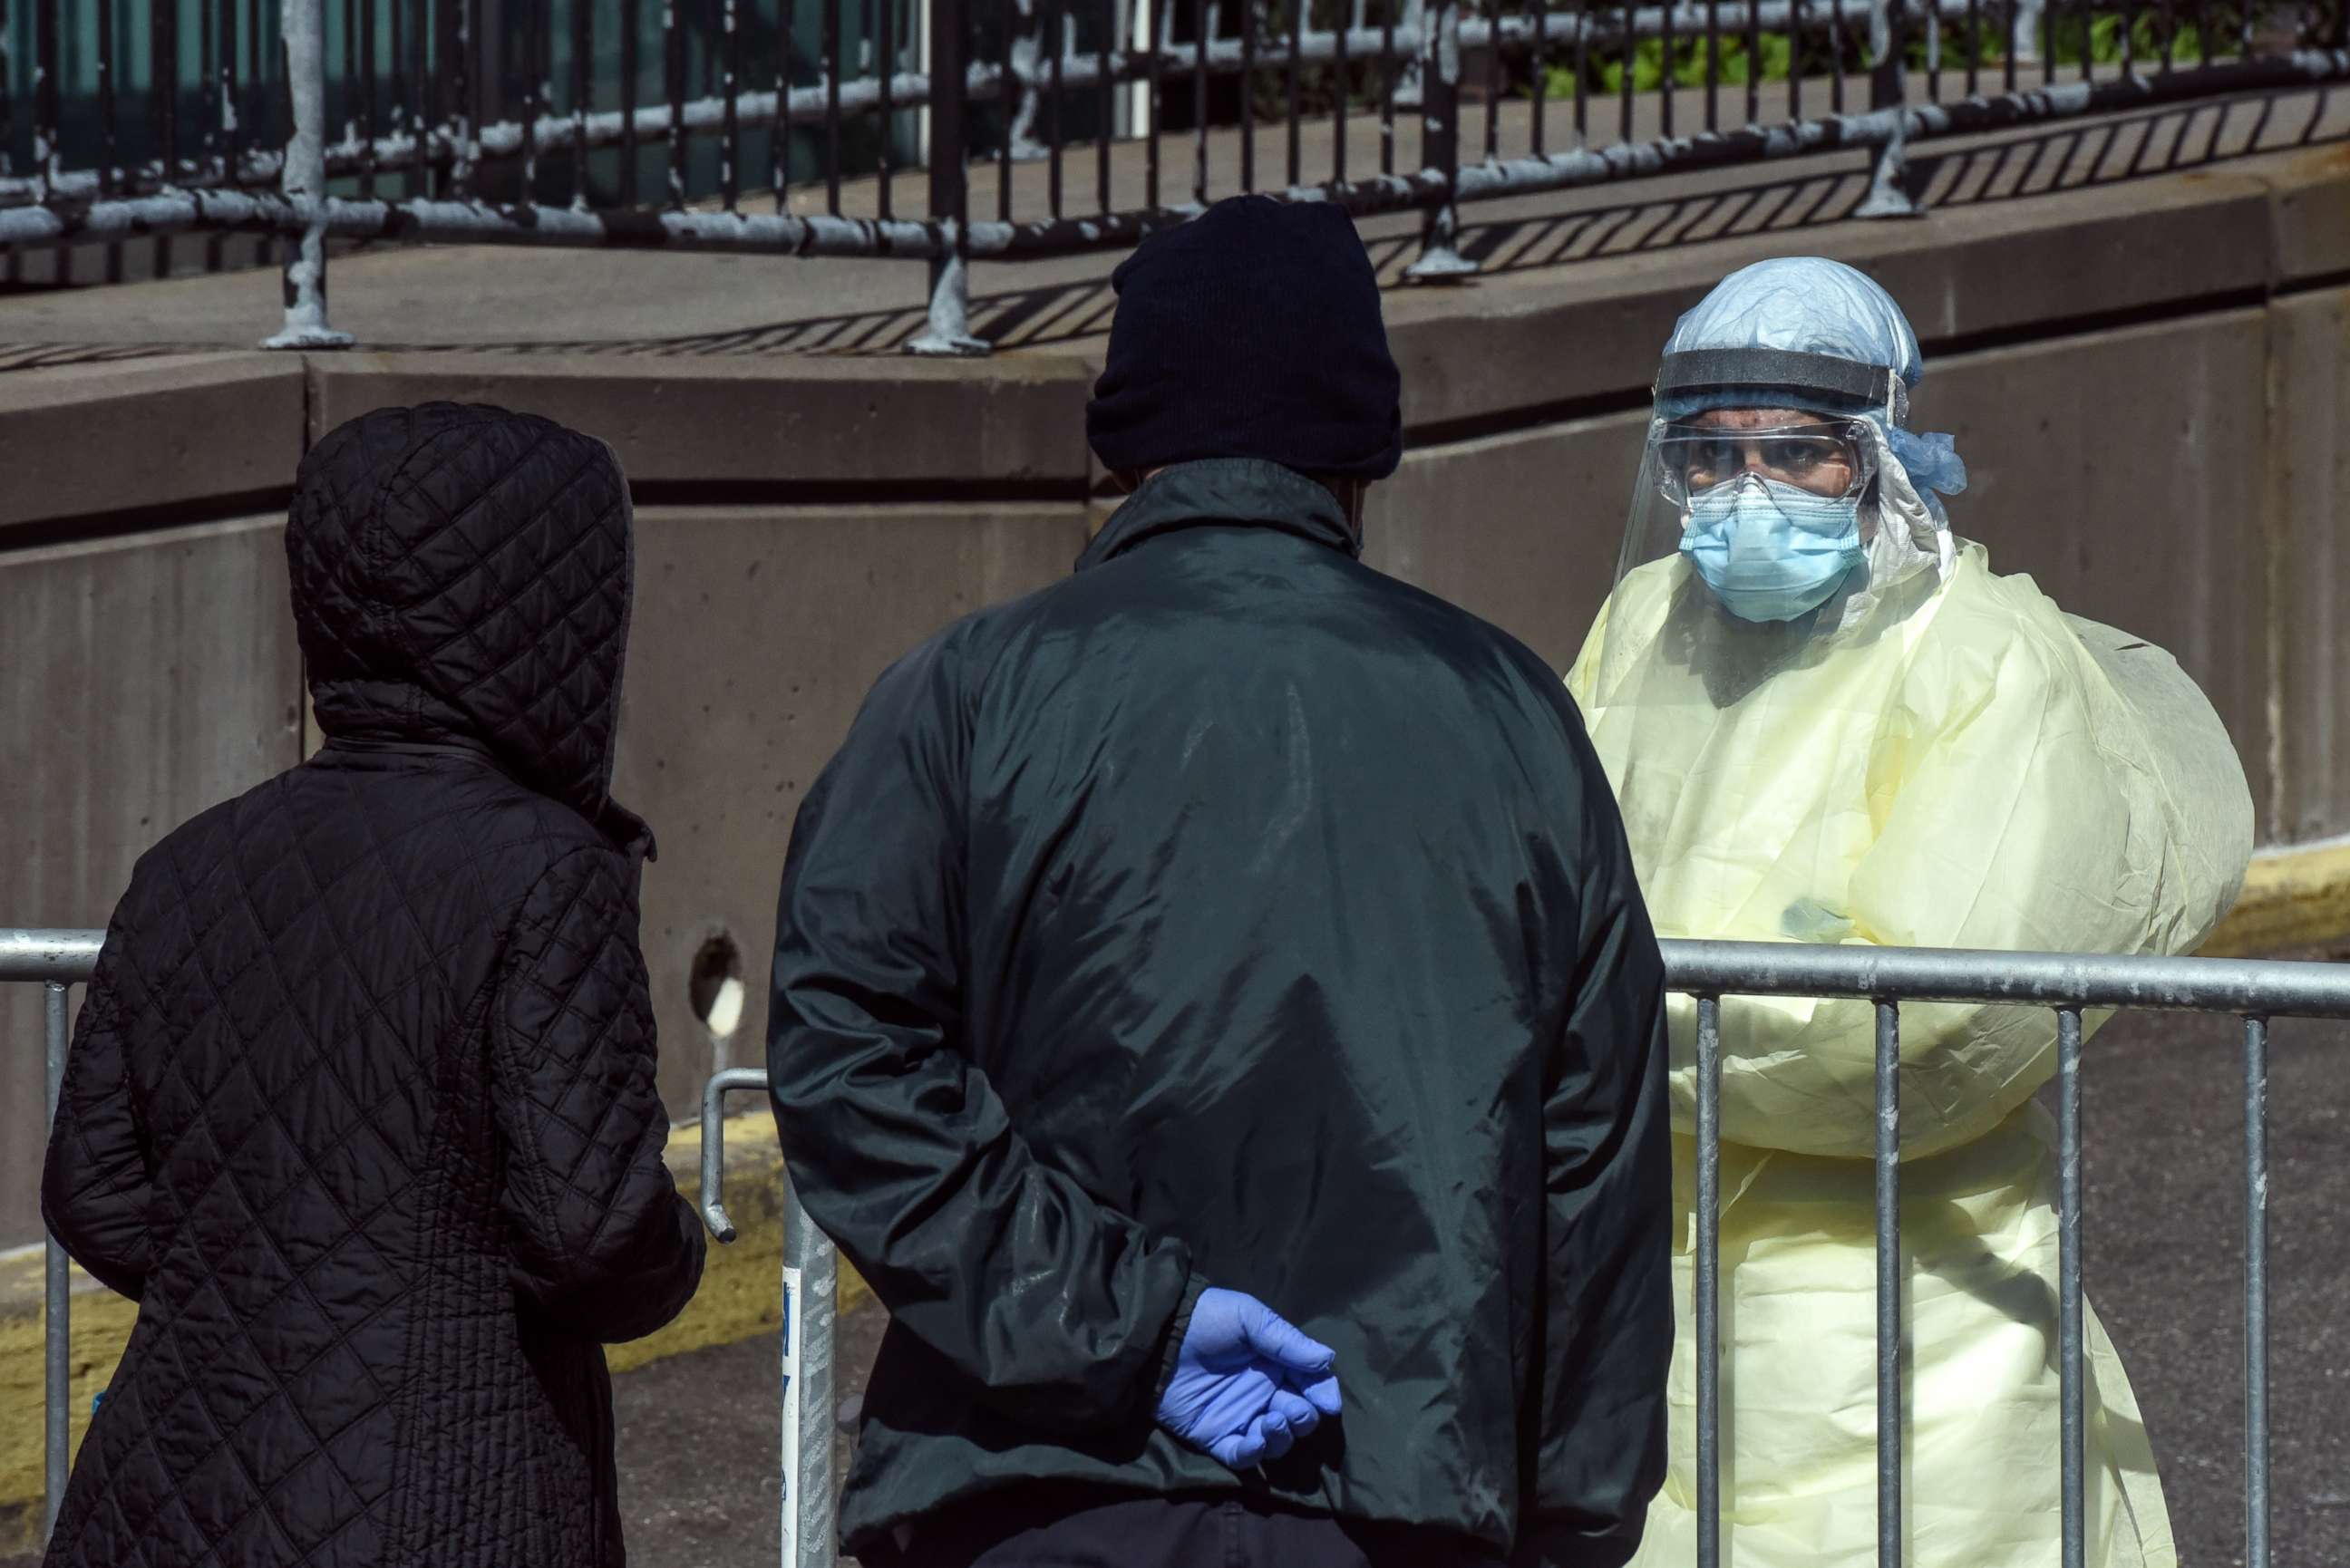 PHOTO: A medical worker speaks with people outside of Elmhurst Hospital on April 1, 2020, in New York.